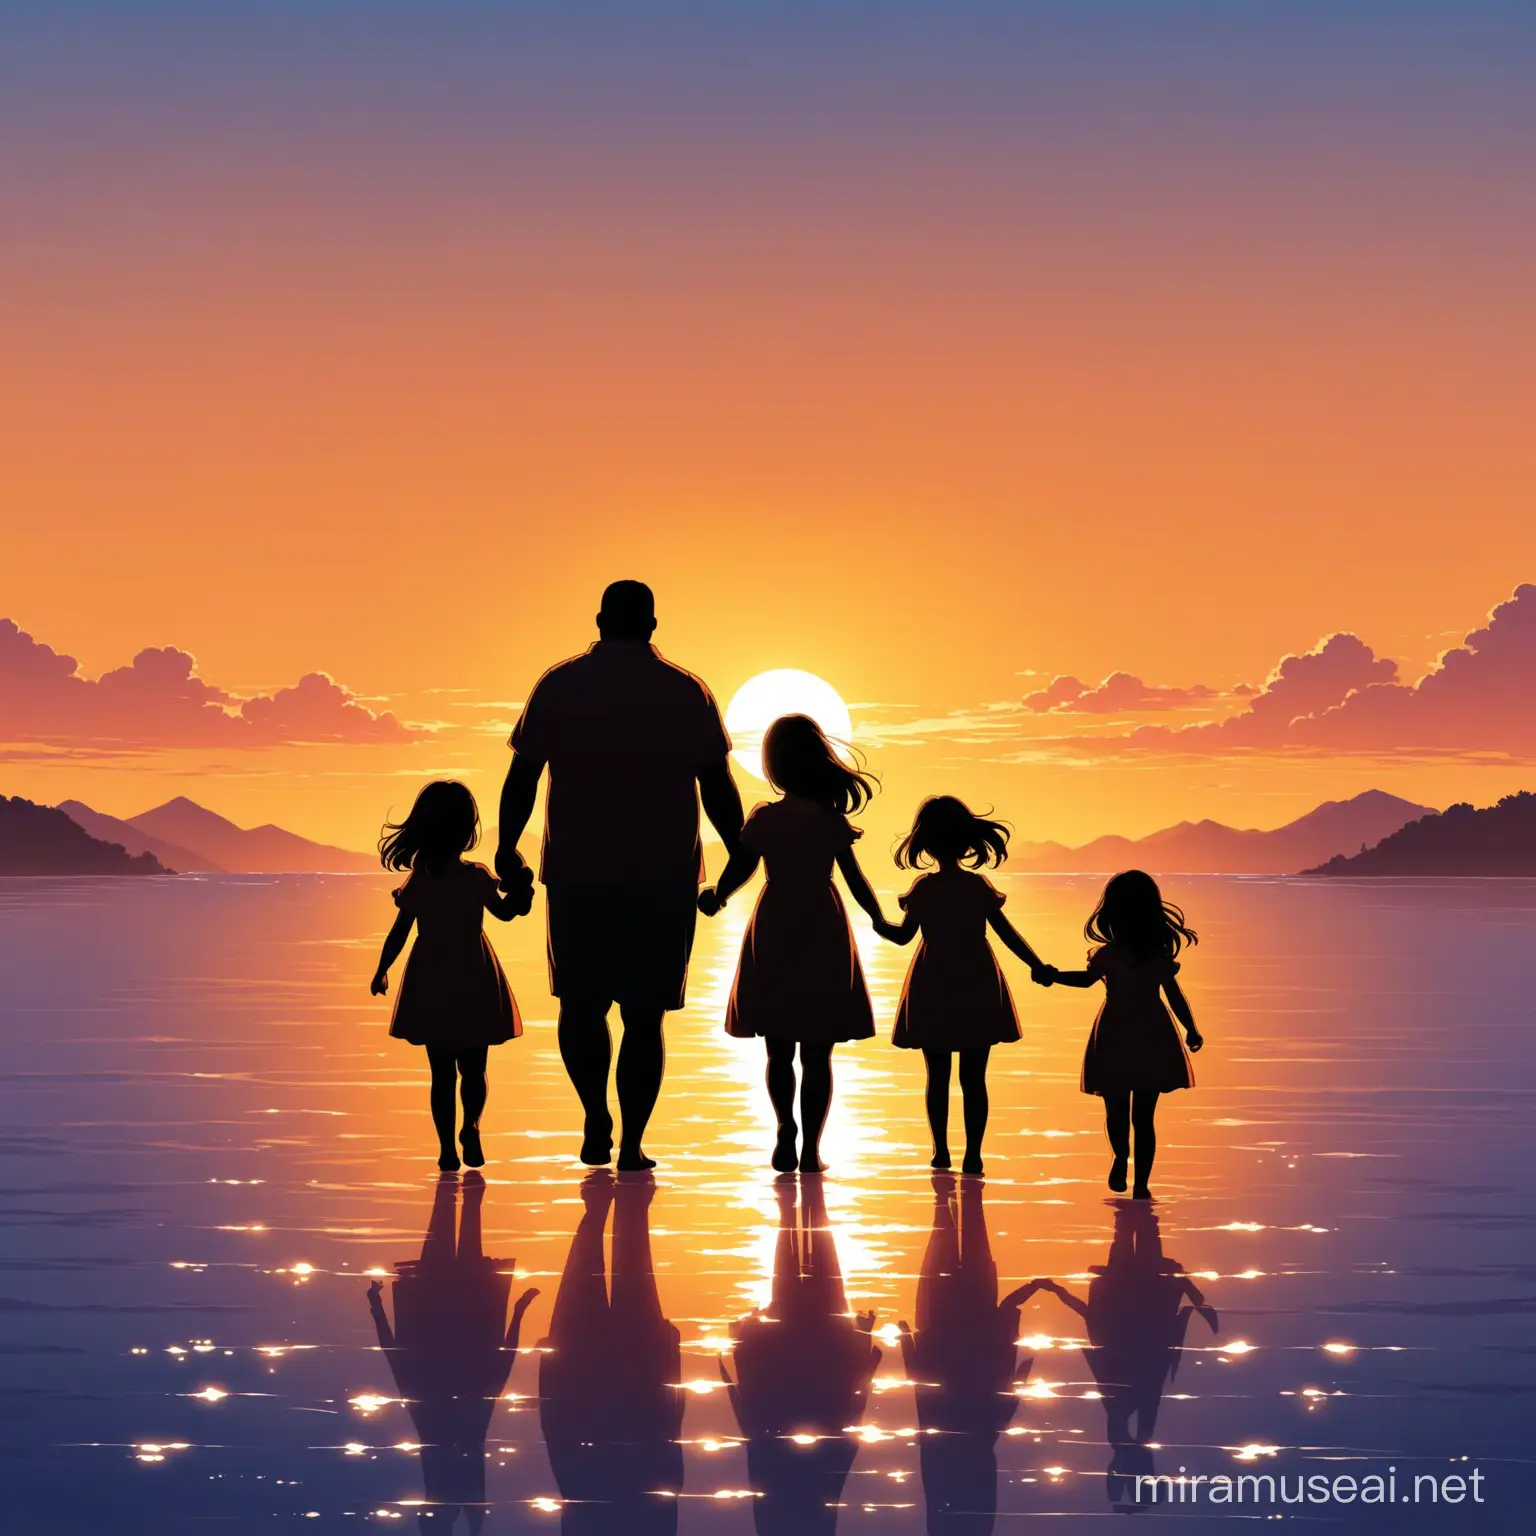 Family Silhouette Holding Hands at Sunset by the Sea